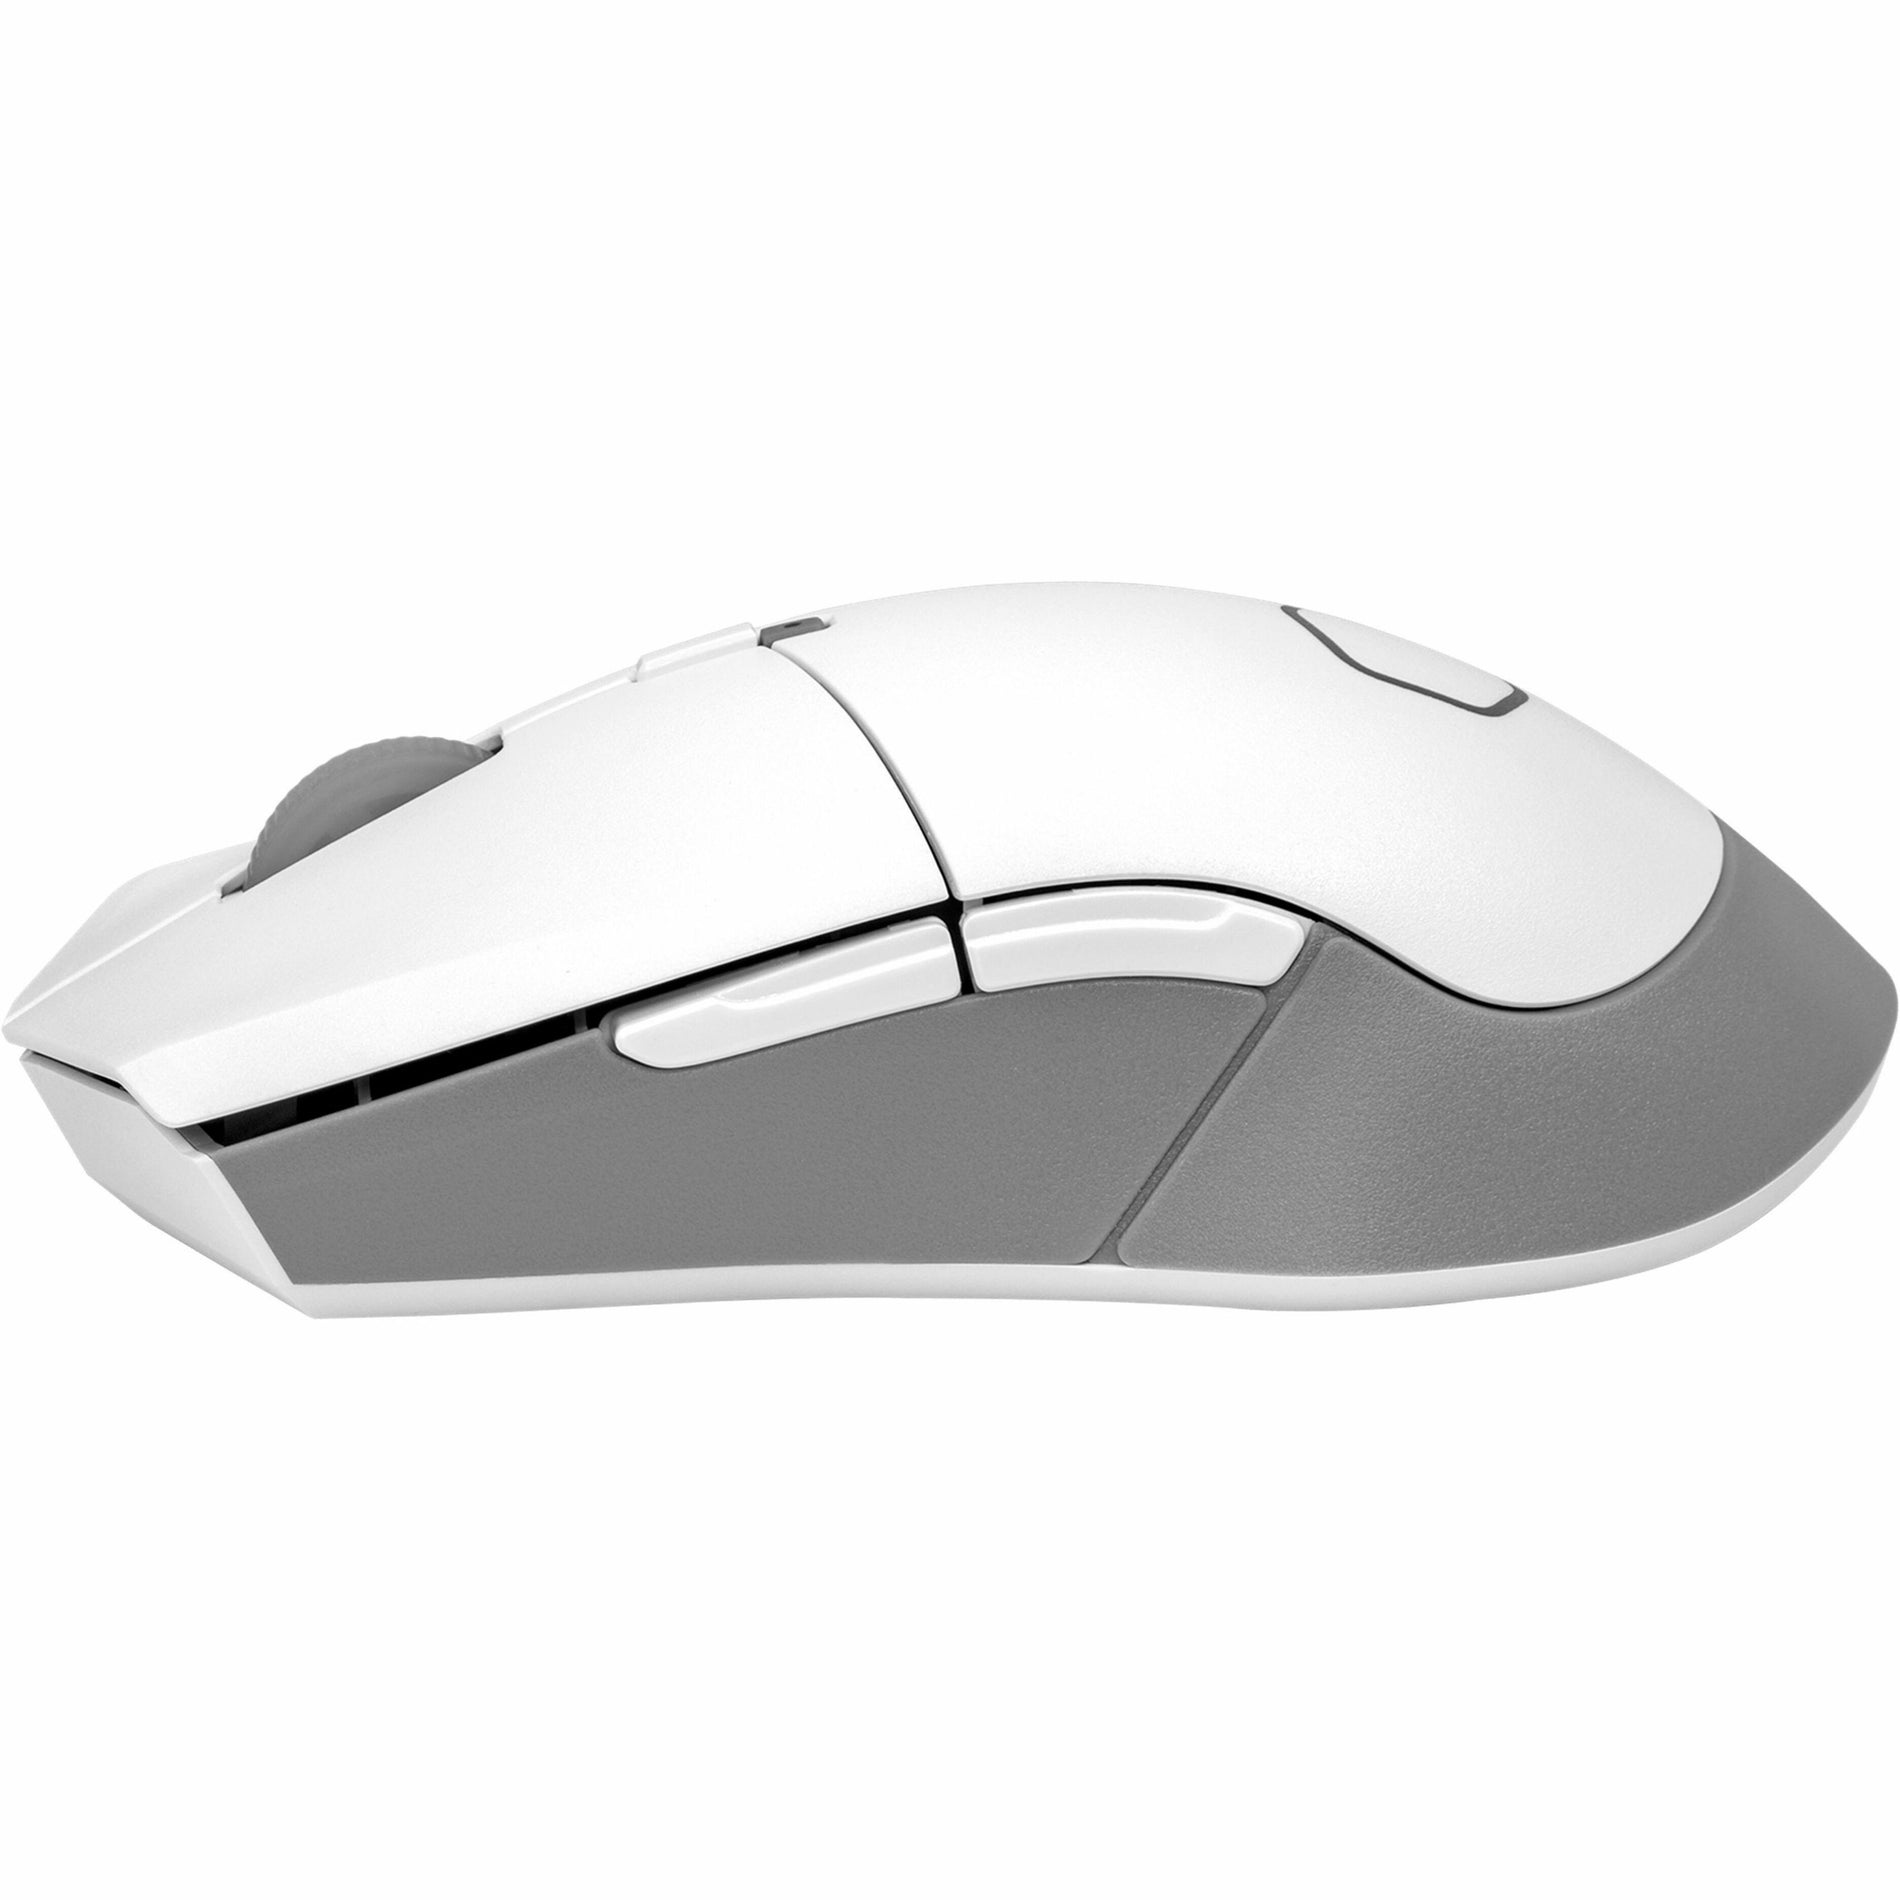 Cooler Master MM-311-WWOW1 MM311 Gaming Mouse, Symmetrical Design, 10000 DPI, Wireless Connectivity